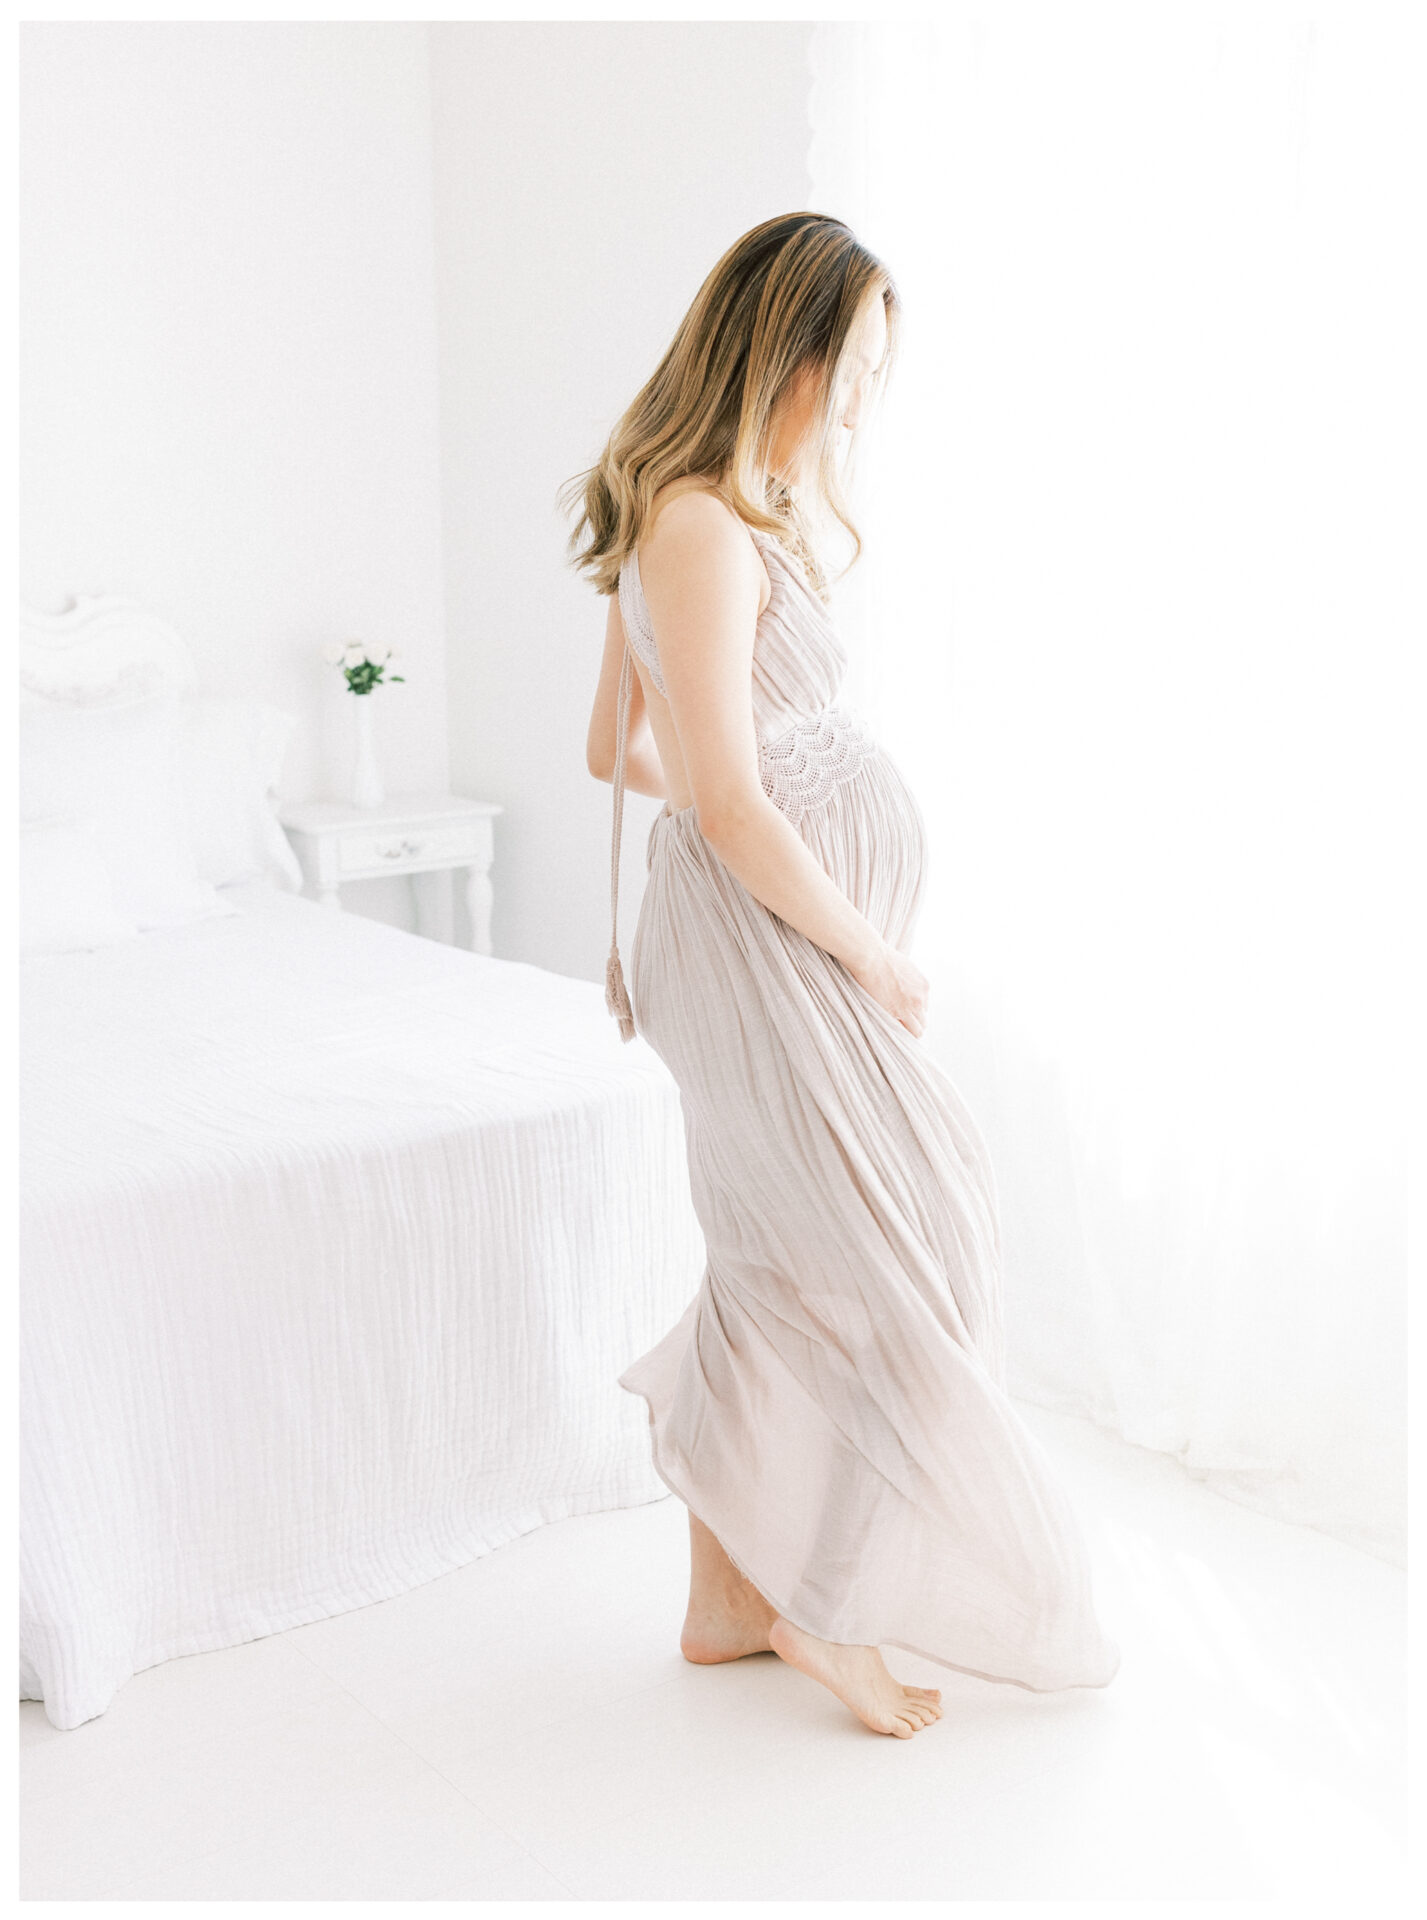 Winter Freire Photography | Fine Art Maternity Boudoir | Expecting mother twirling in a long dress